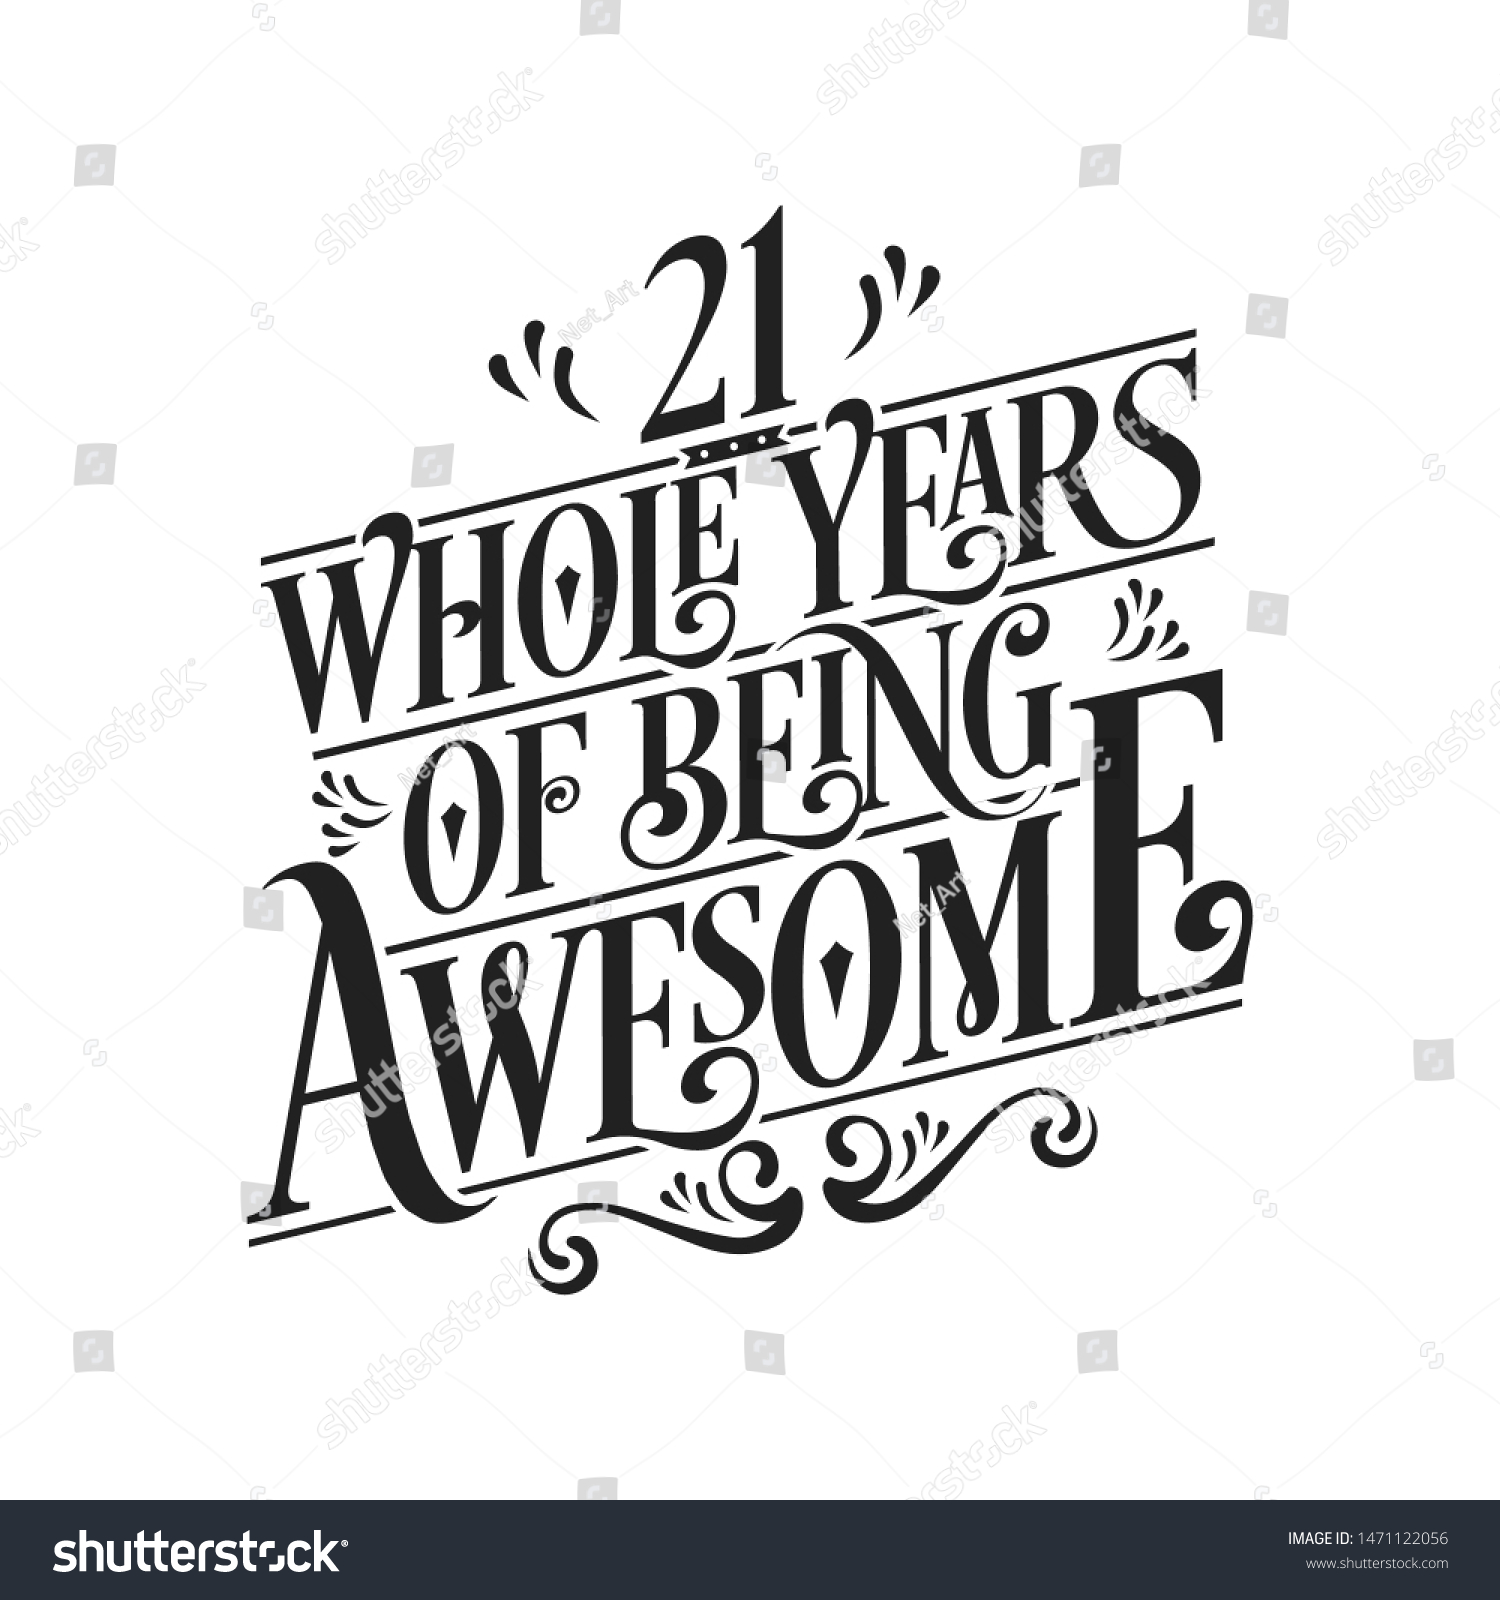 SVG of 21 Whole Years Of Being Awesome - 21st Birthday And Wedding  Anniversary Typographic Design Vector svg